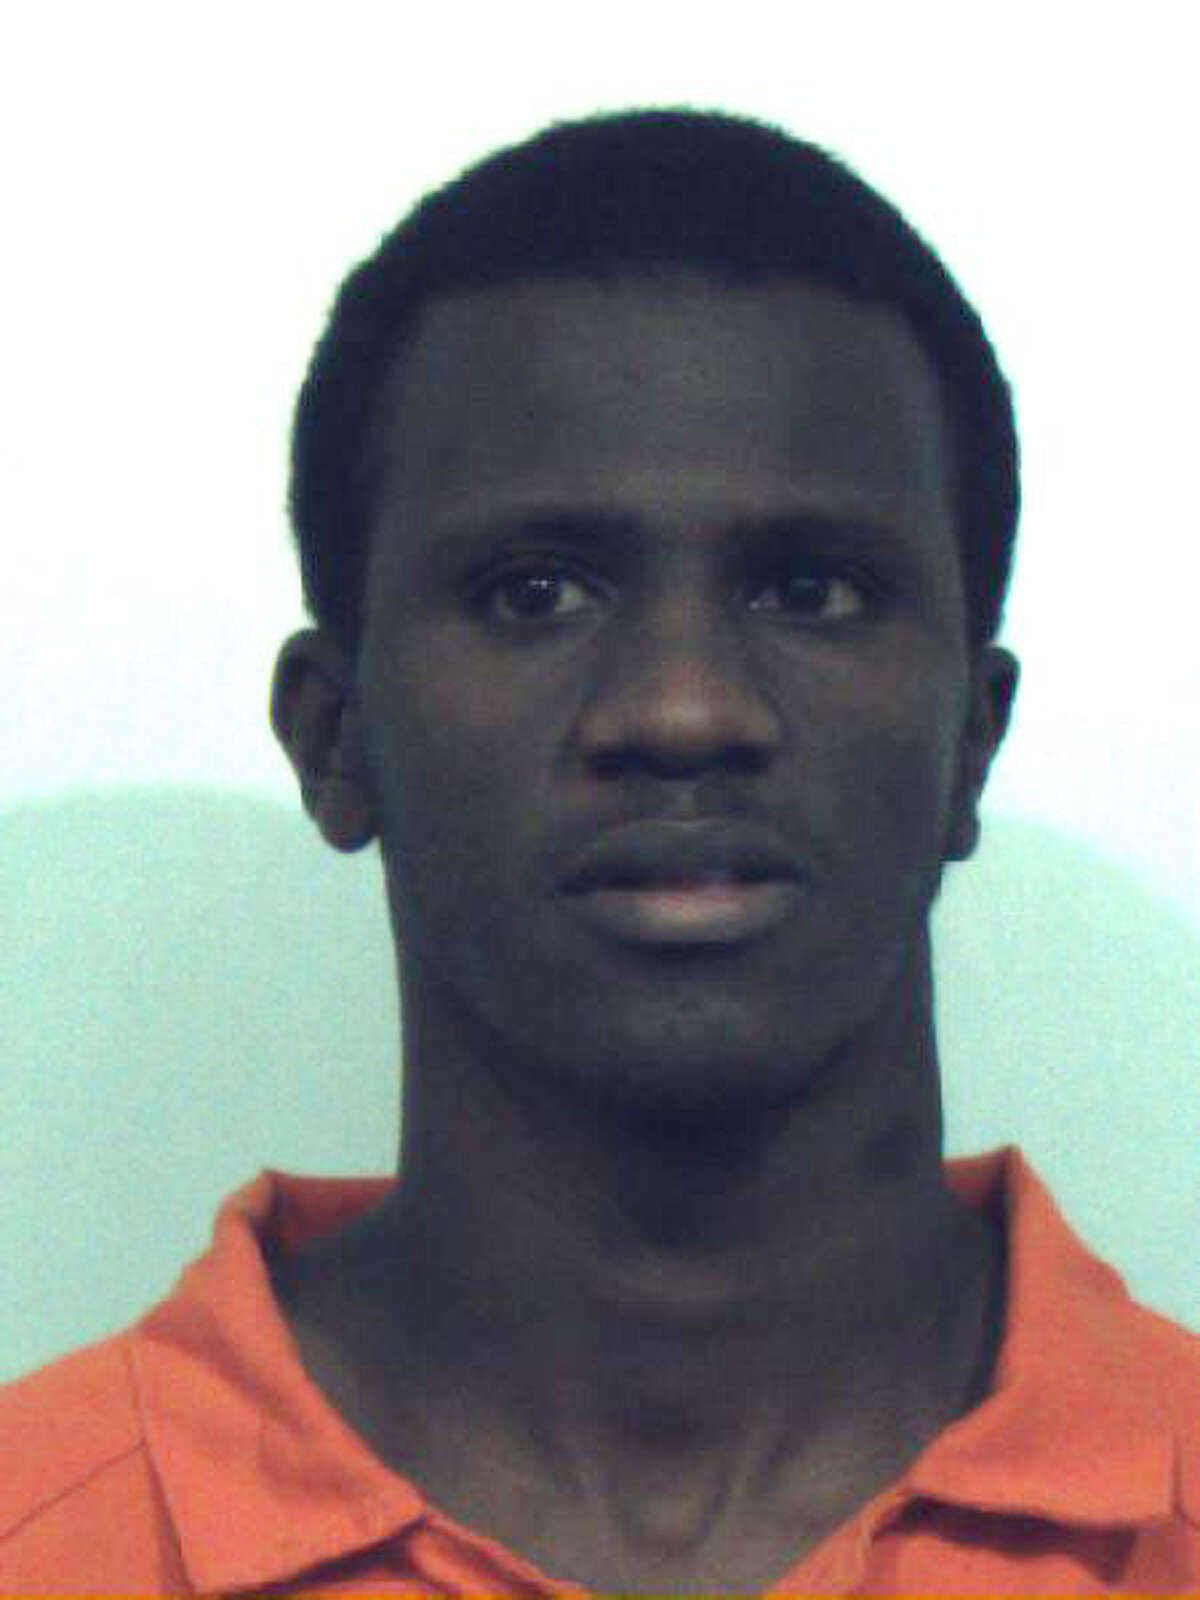 Abdi Abukar, pictured in a Department of Corrections photo.